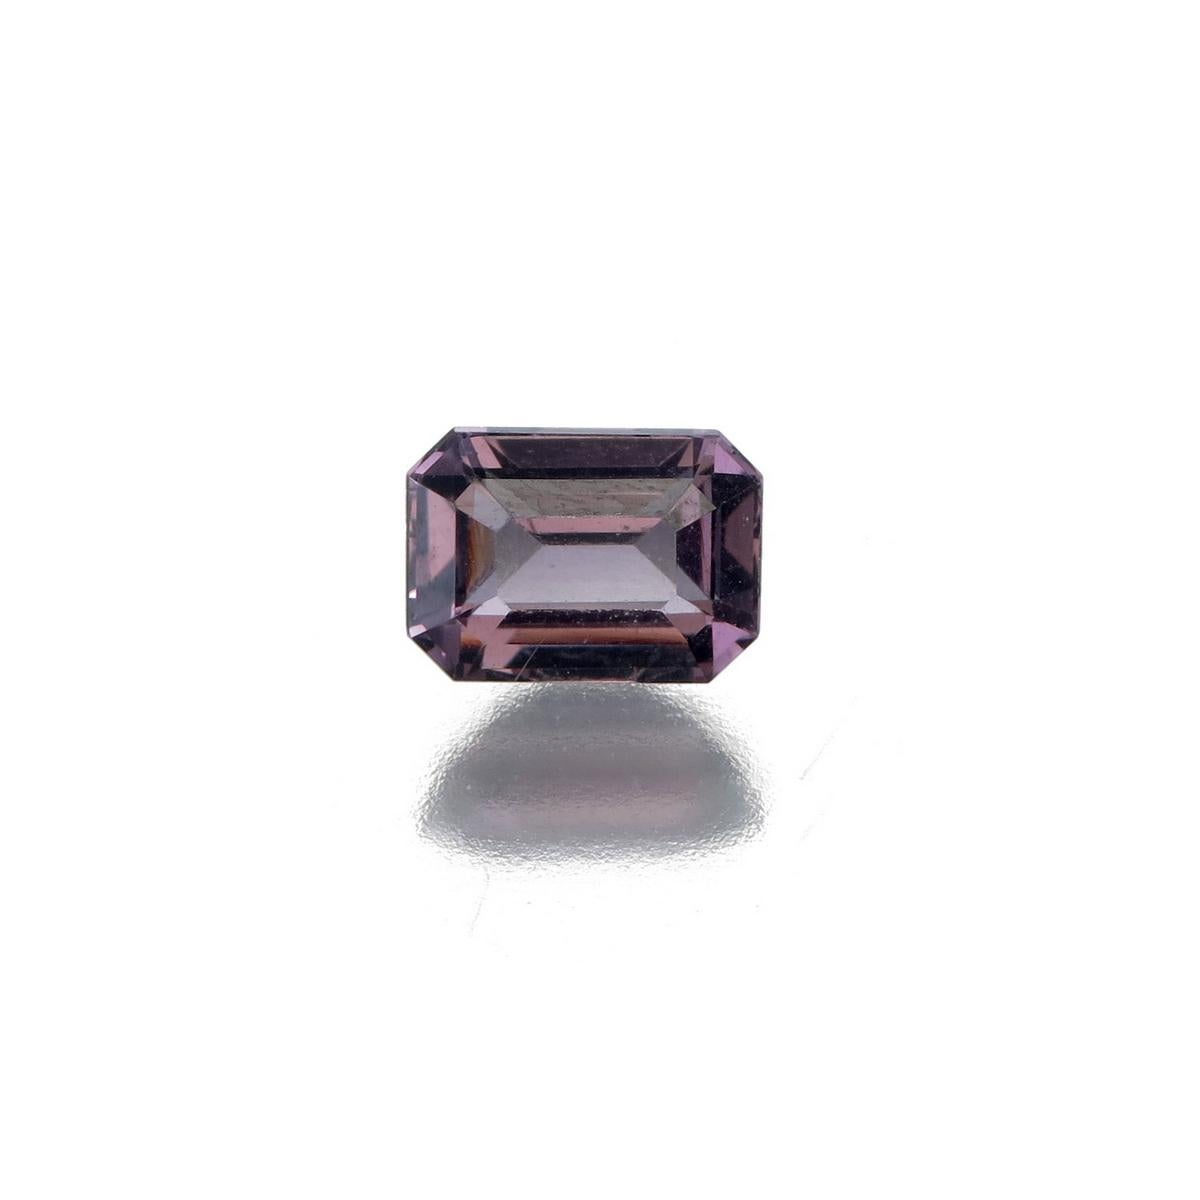 1.36 Carat Natural Purple Spinel from Burma
Dimension: 7.23 x 5.21 x 3.74. mm
Weight: 1.36 Carat
Shape: Octagon Cut
No Heat
GIL Certified Report No; STO2022102151329